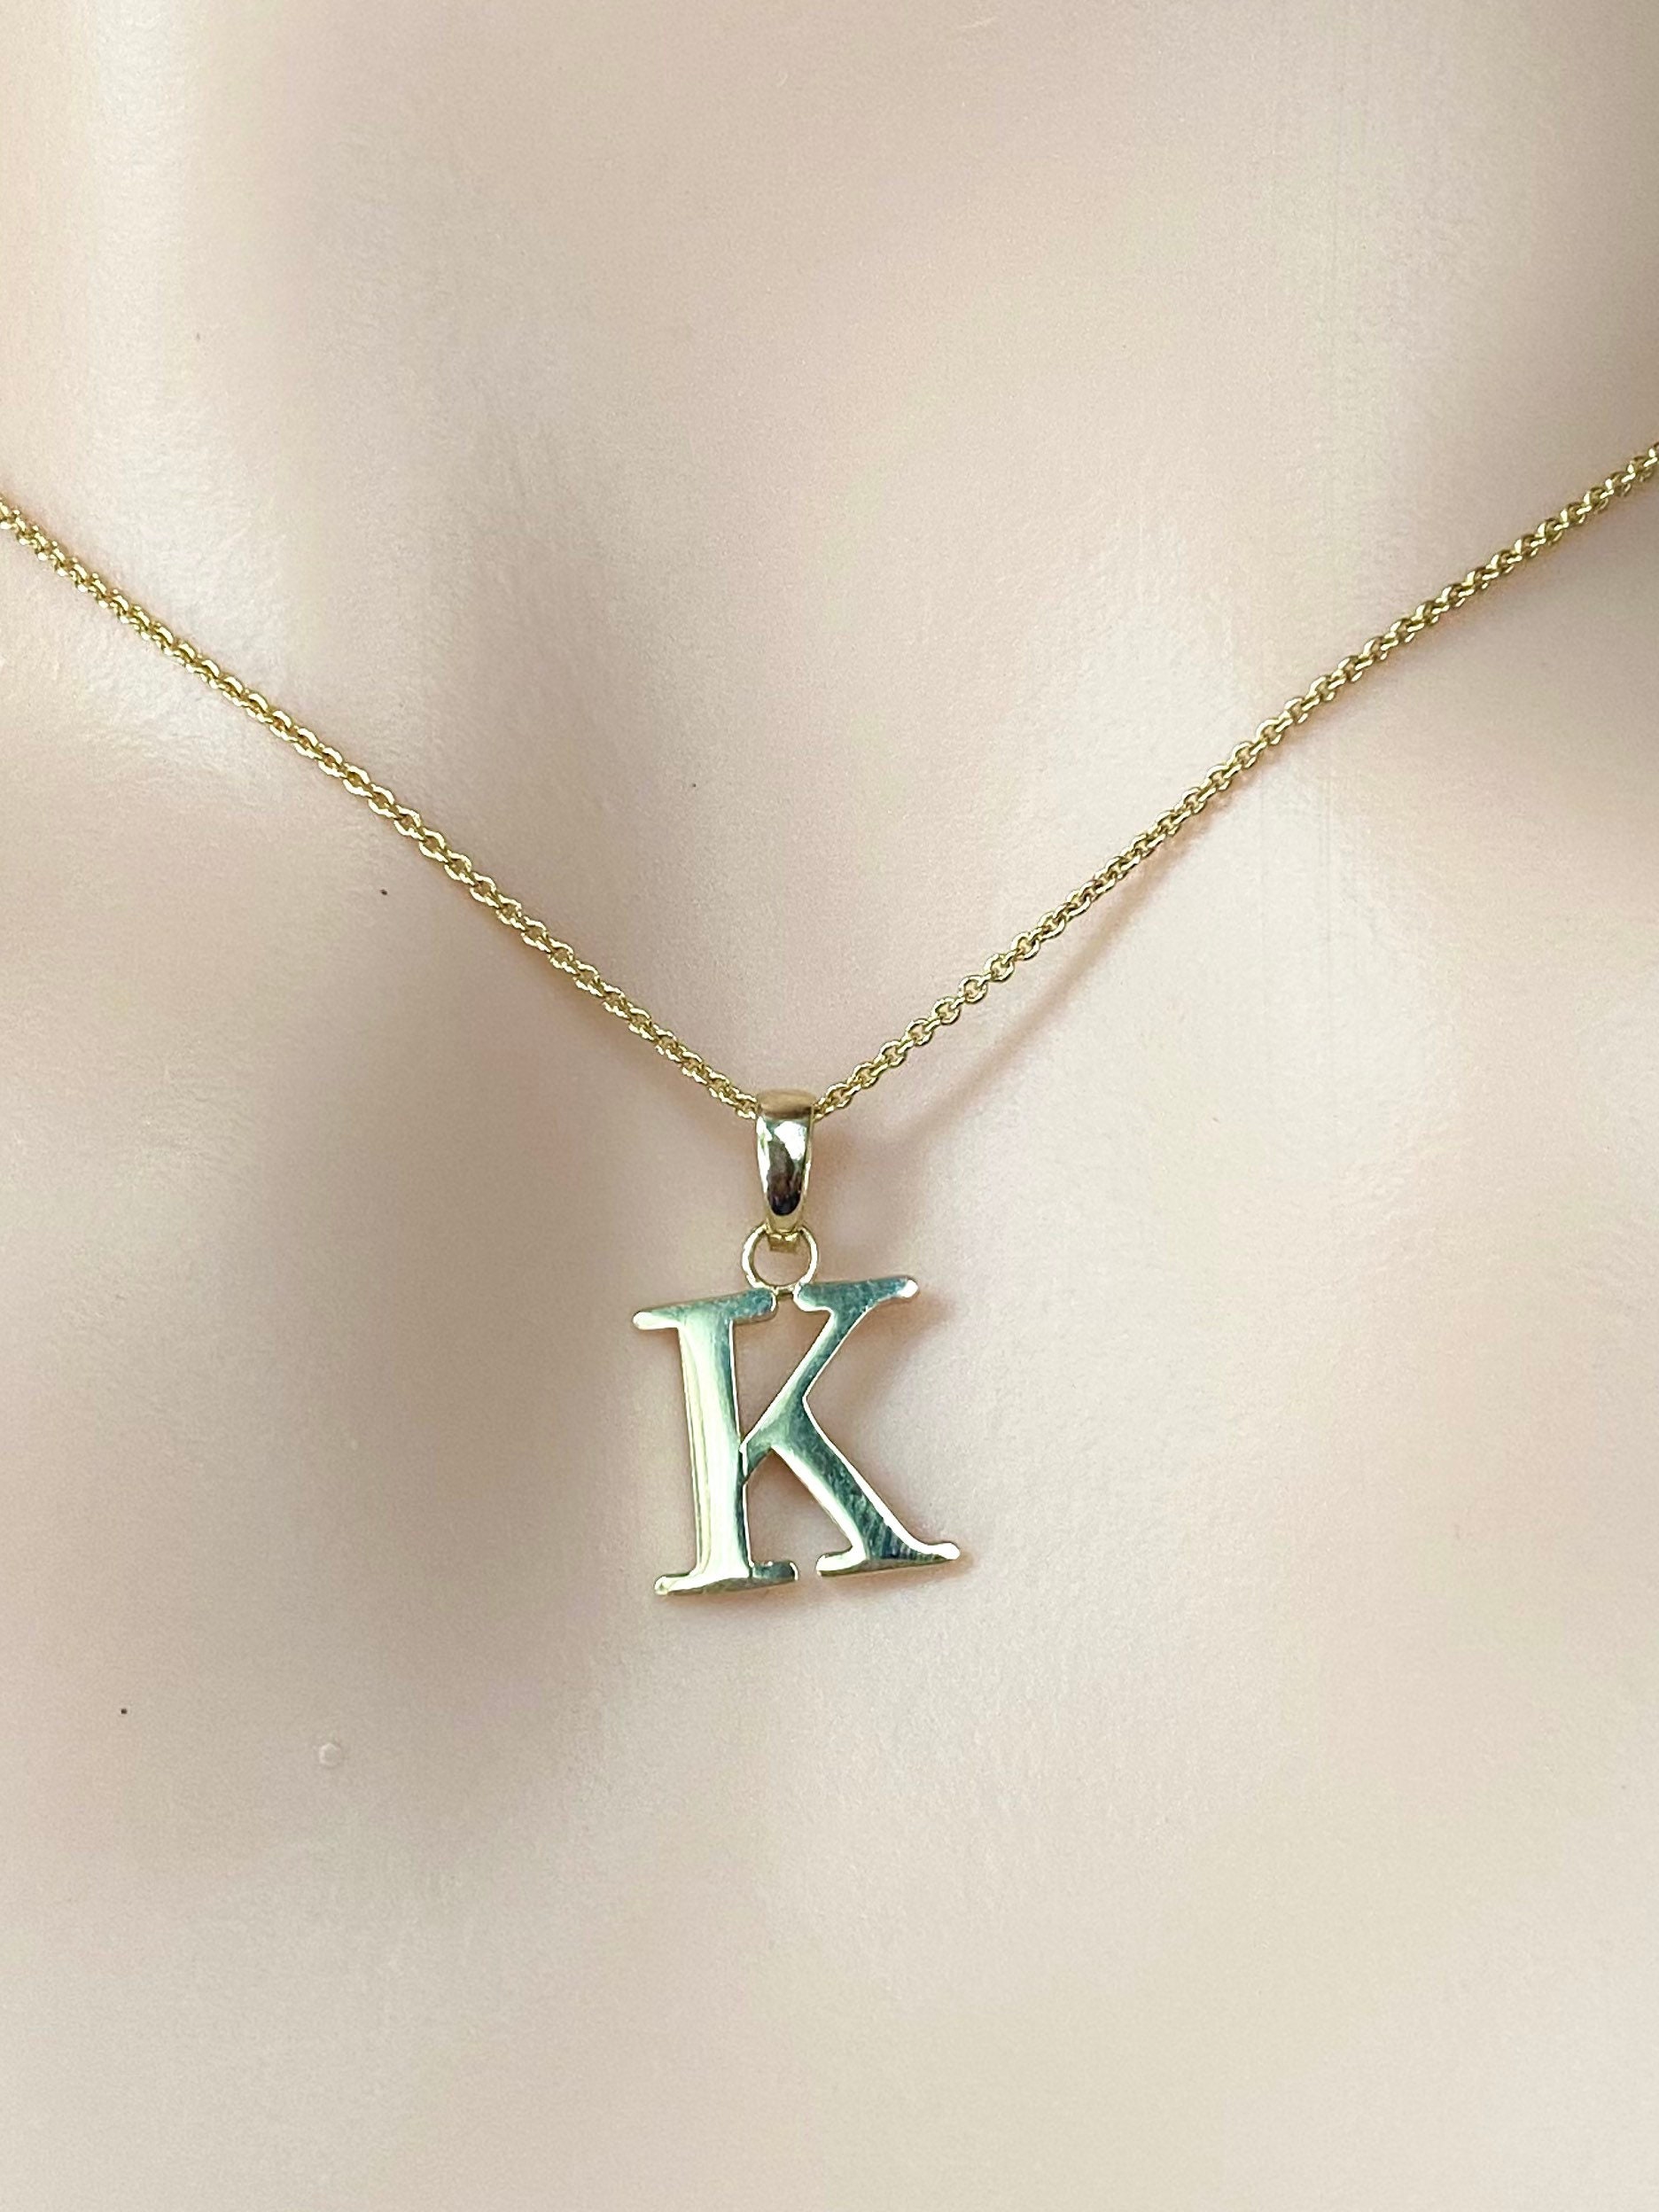 14K Yellow Gold Initial Necklace, Small Letter Necklace, Letter K Necklace  in 14K Gold, Personalized Jewelry, Gold Initial Pendant